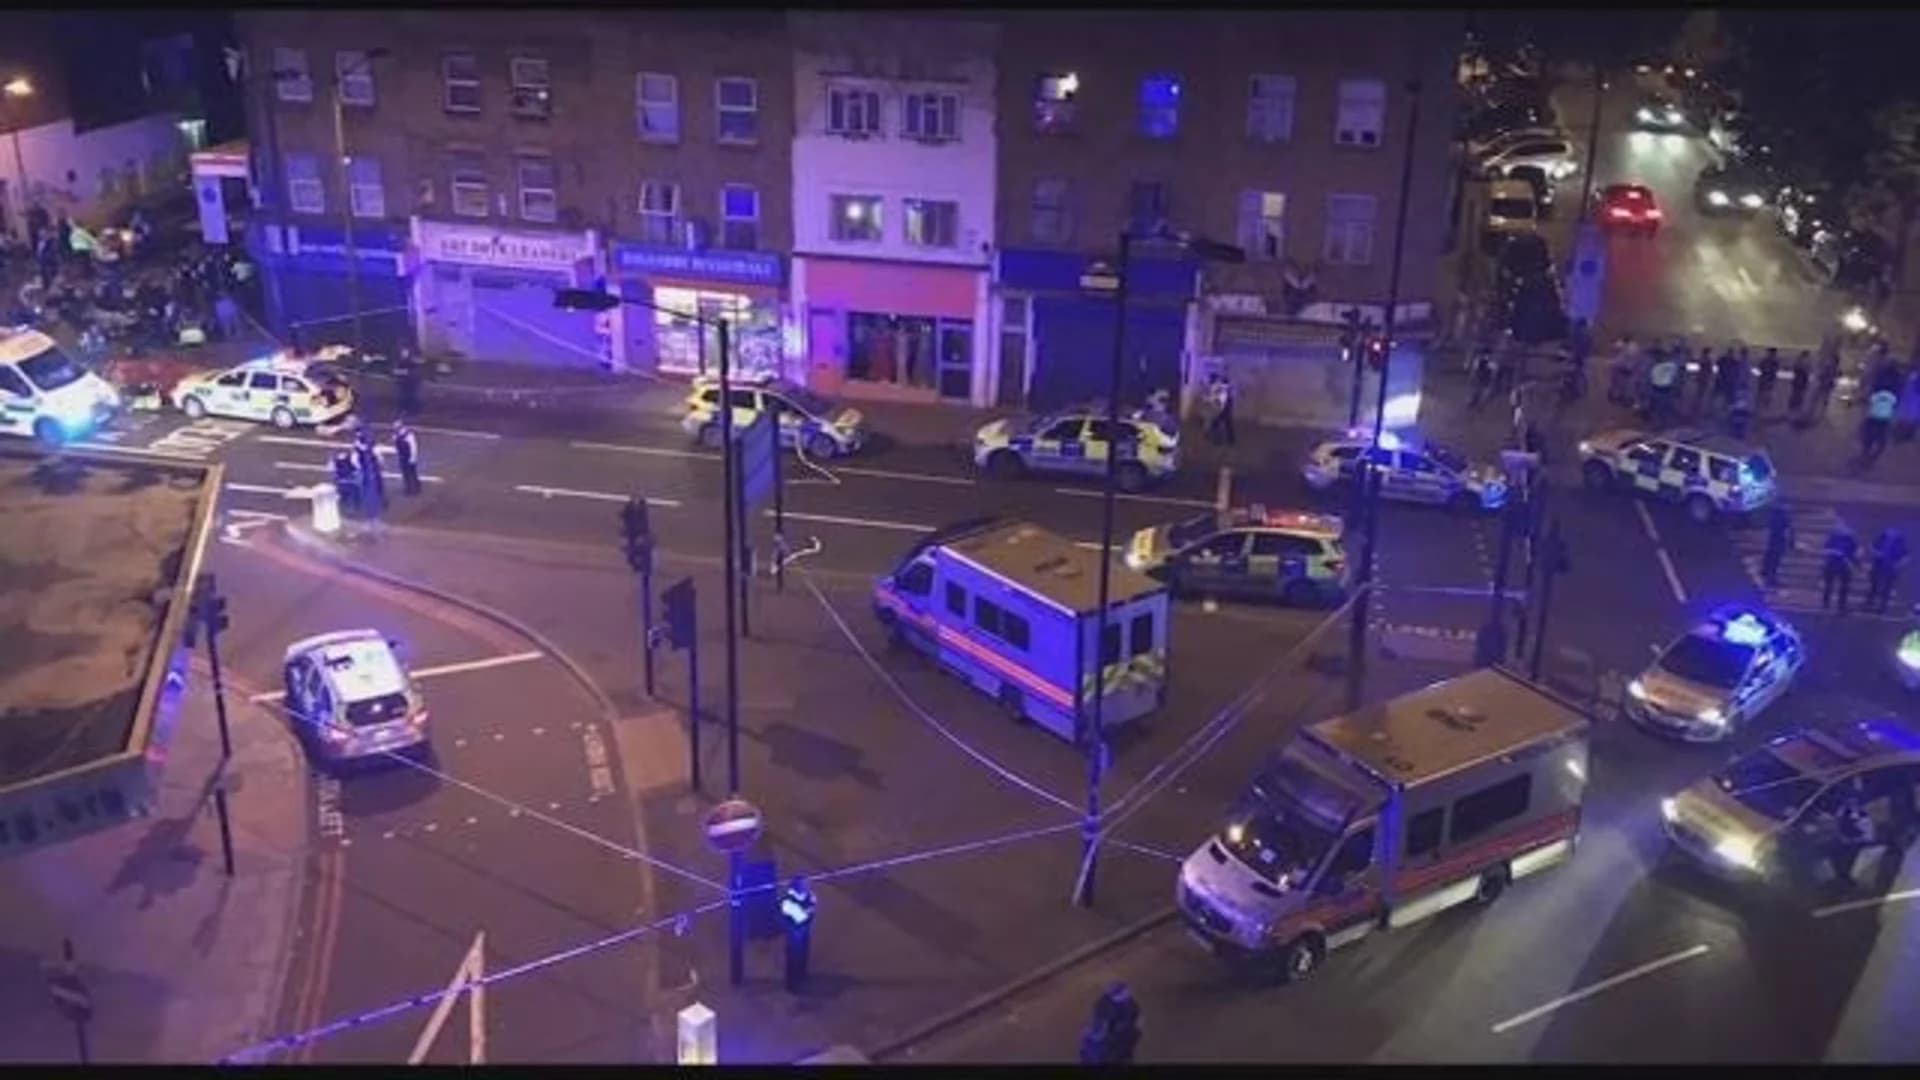 Police: Vehicle strikes several pedestrians on London road